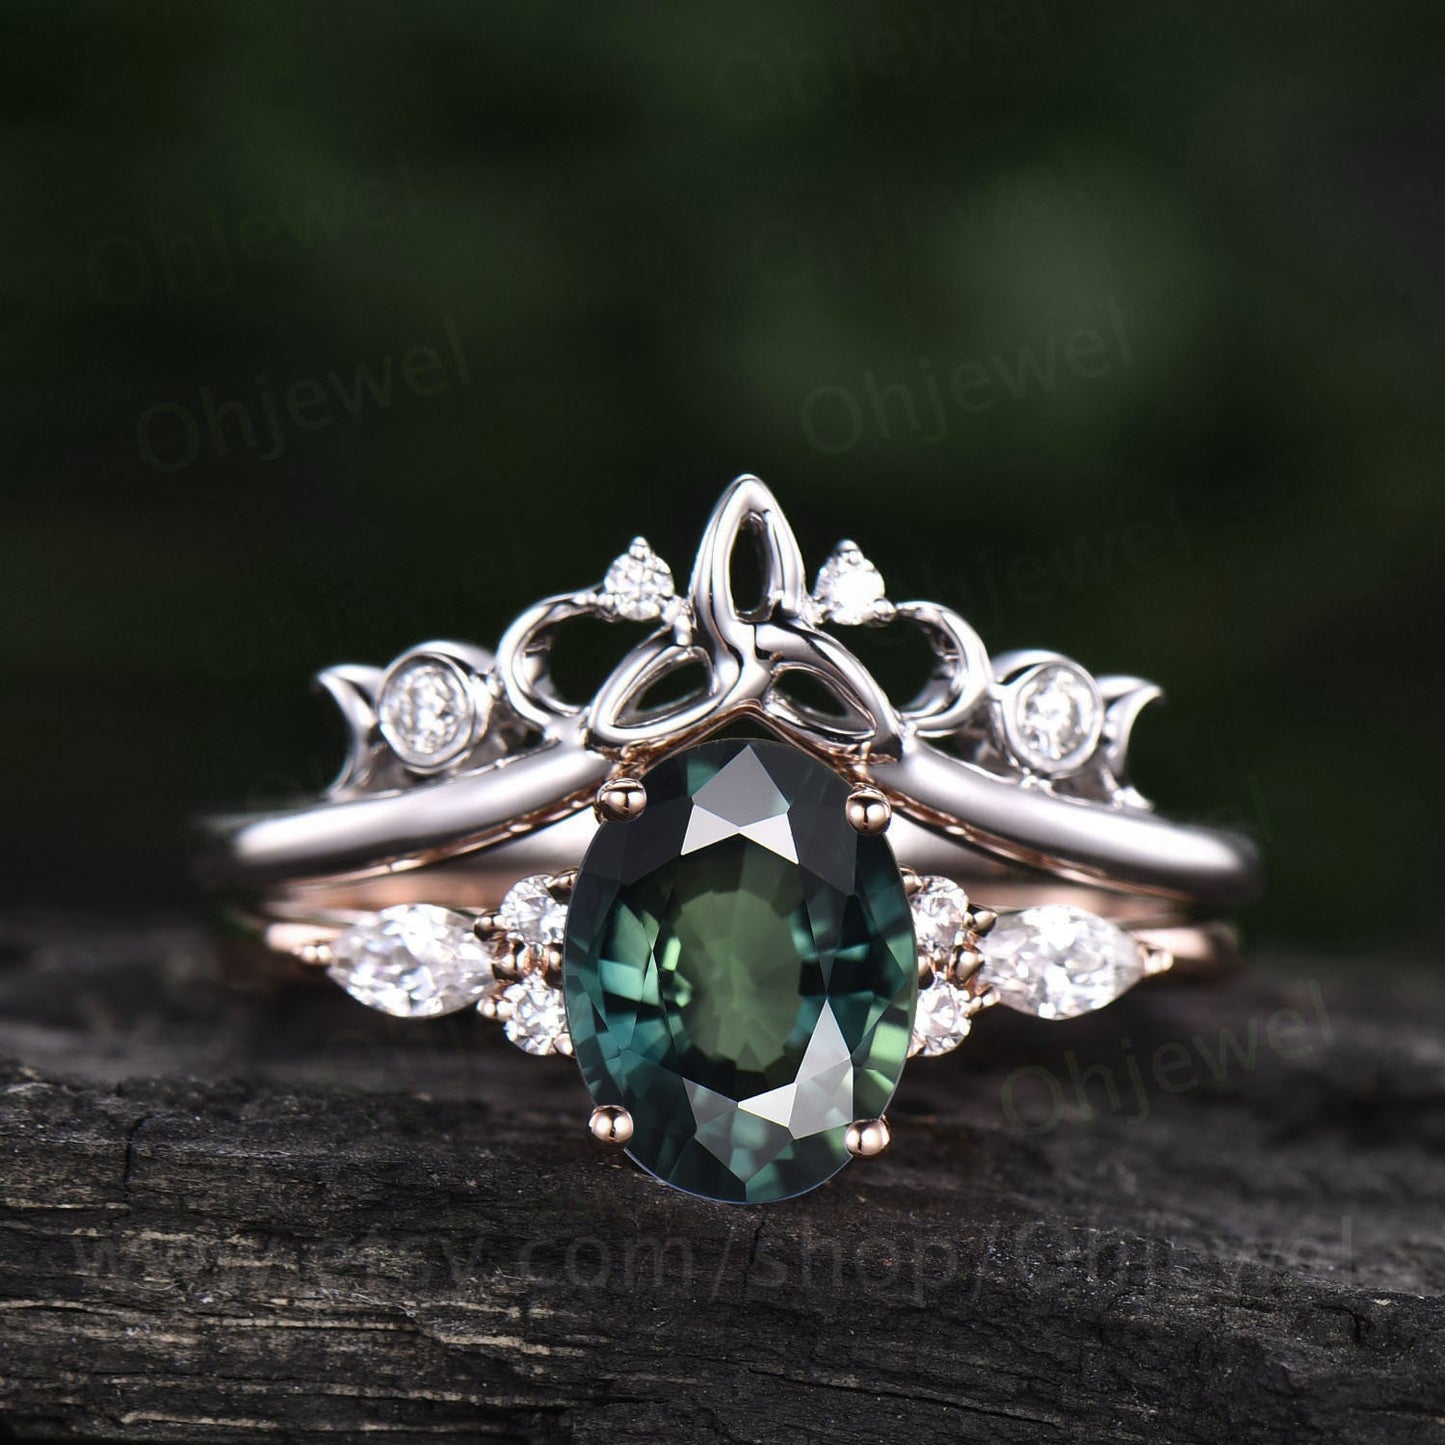 Green teal sapphire ring gold vintage teal sapphire engagement ring set art deco unique engagement ring diamond wedding ring set jewelry